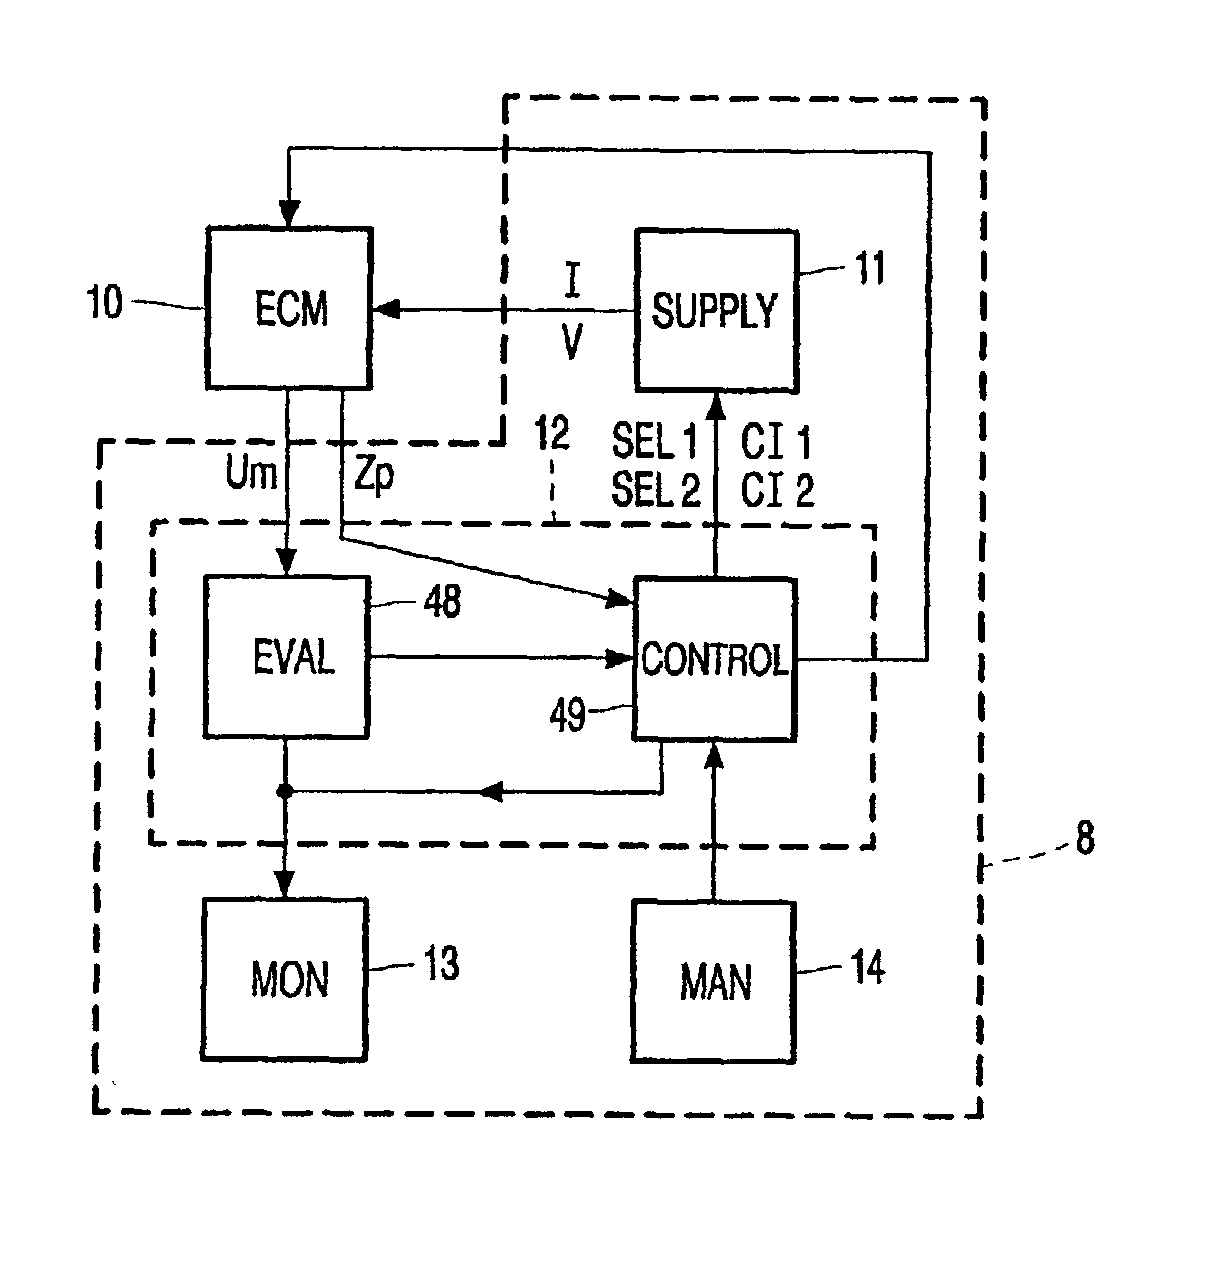 Method of controlling an electrochemical machining process